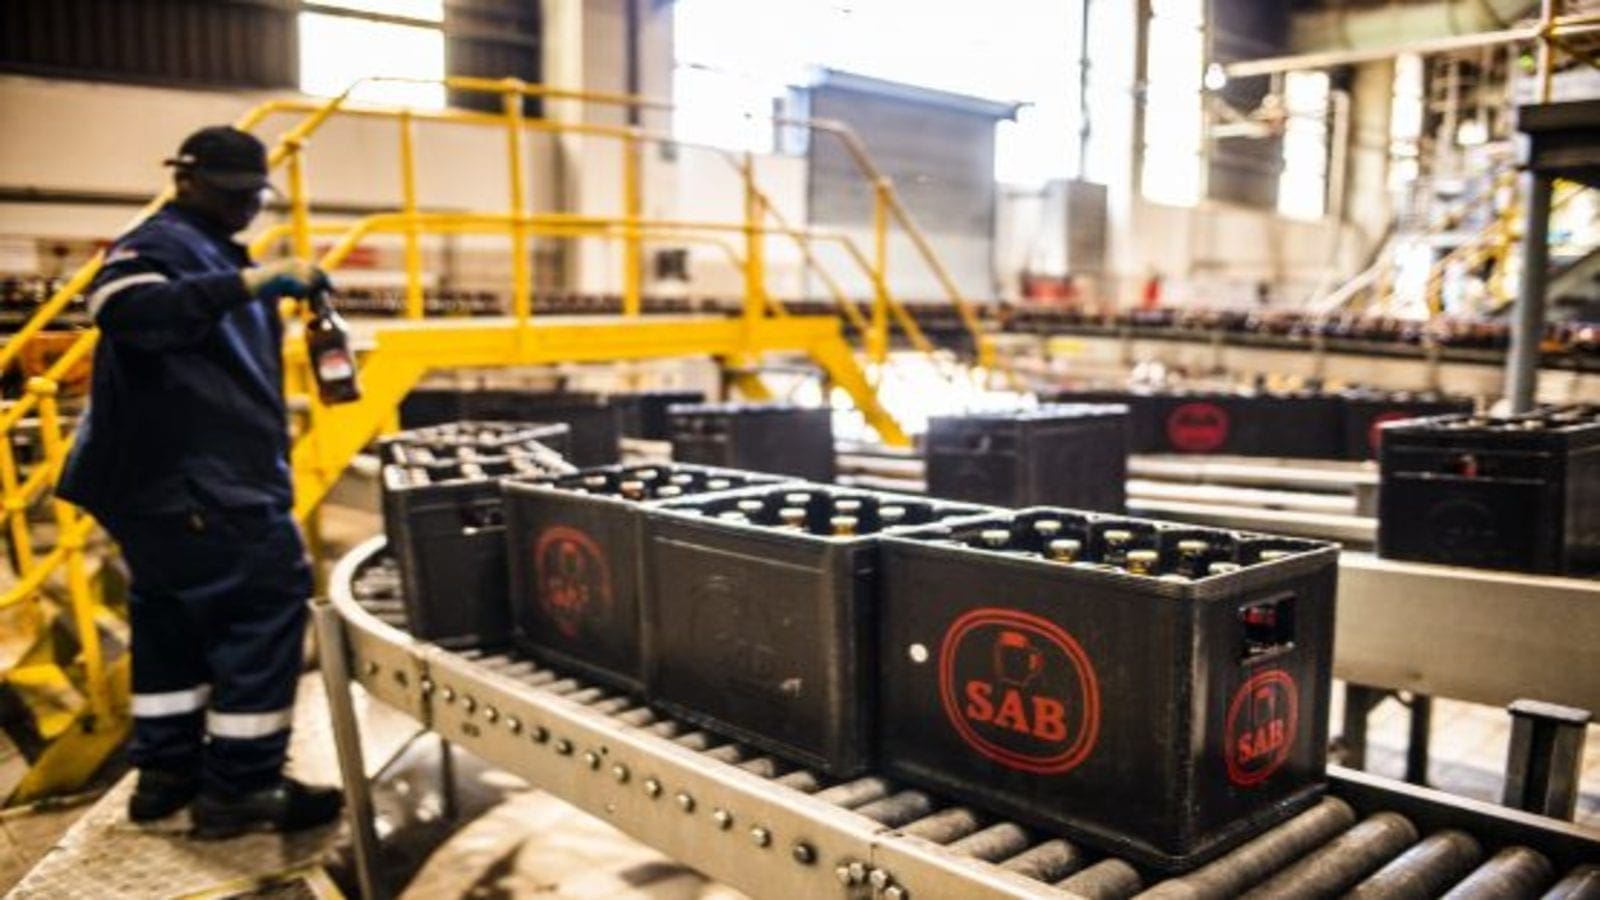 South African Breweries takes legal action against alcohol ban, suspends commitments on jobs and investments